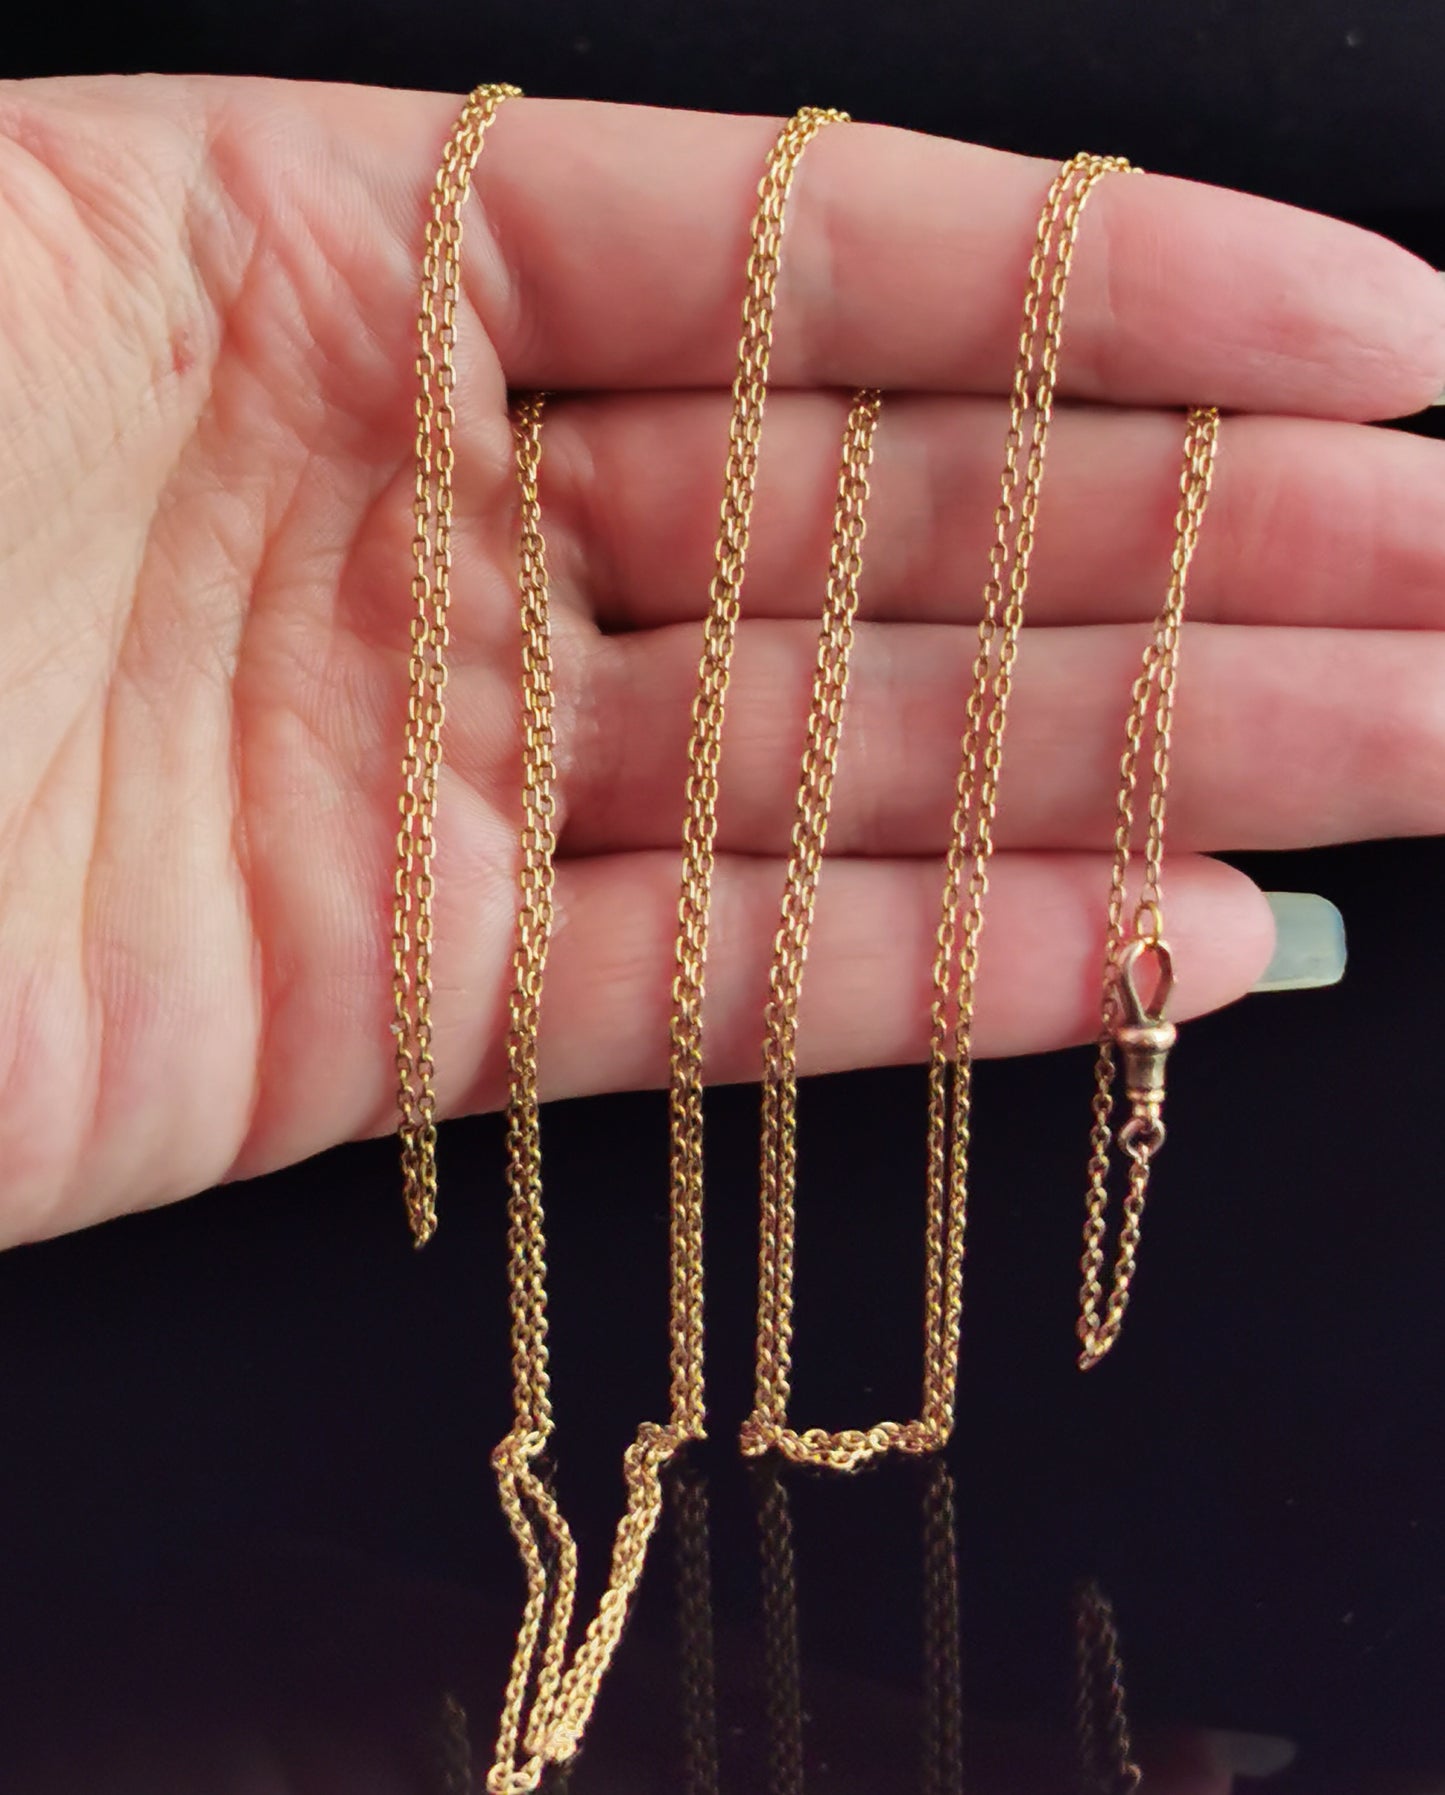 Antique 15ct yellow gold longuard chain necklace, Victorian, trace link